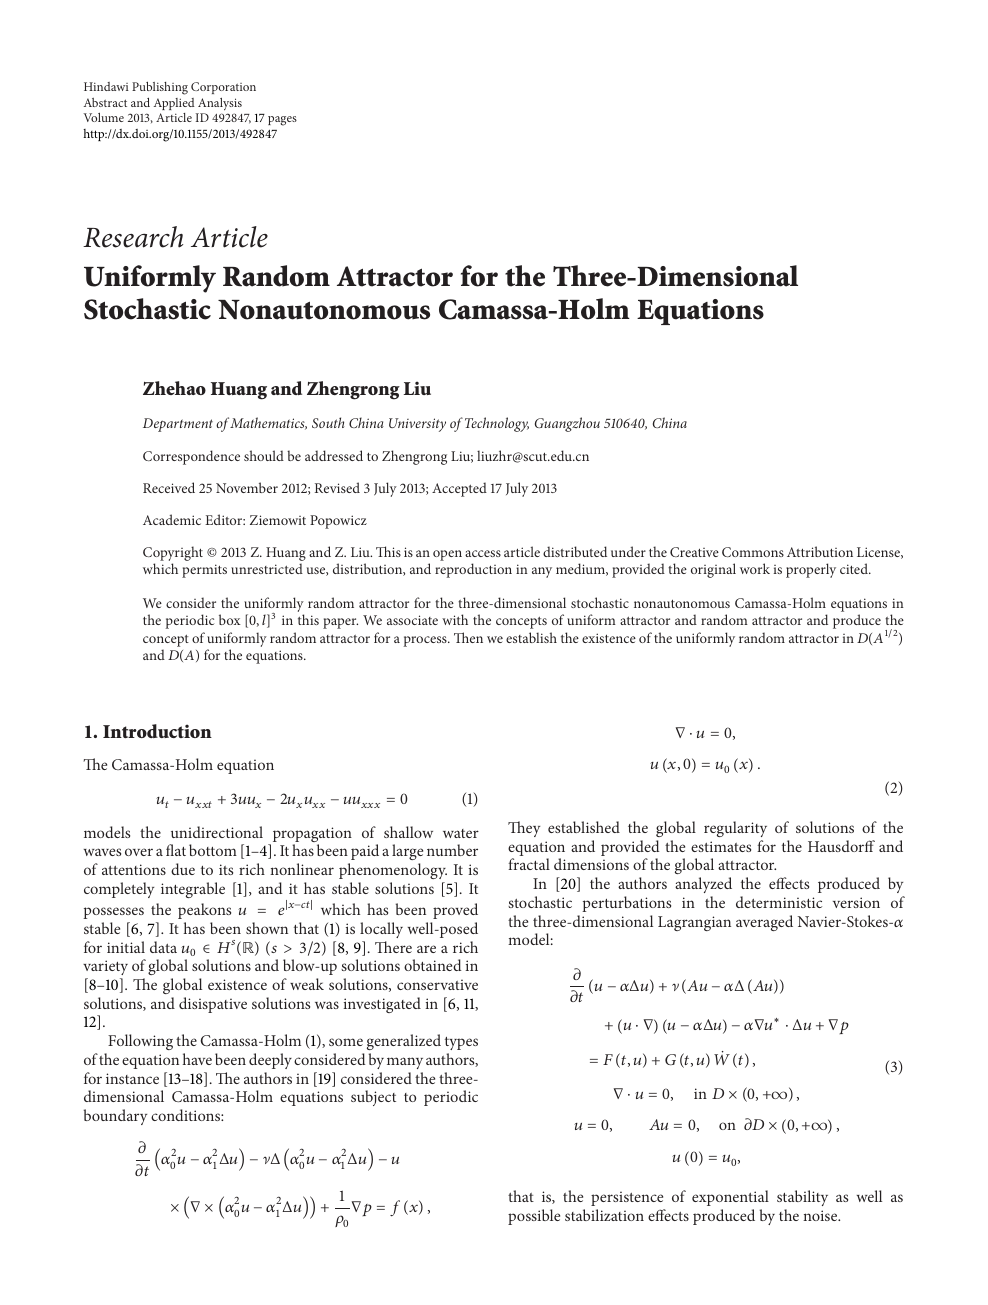 Uniformly Random Attractor For The Three Dimensional Stochastic Nonautonomous Camassa Holm Equations Topic Of Research Paper In Mathematics Download Scholarly Article Pdf And Read For Free On Cyberleninka Open Science Hub